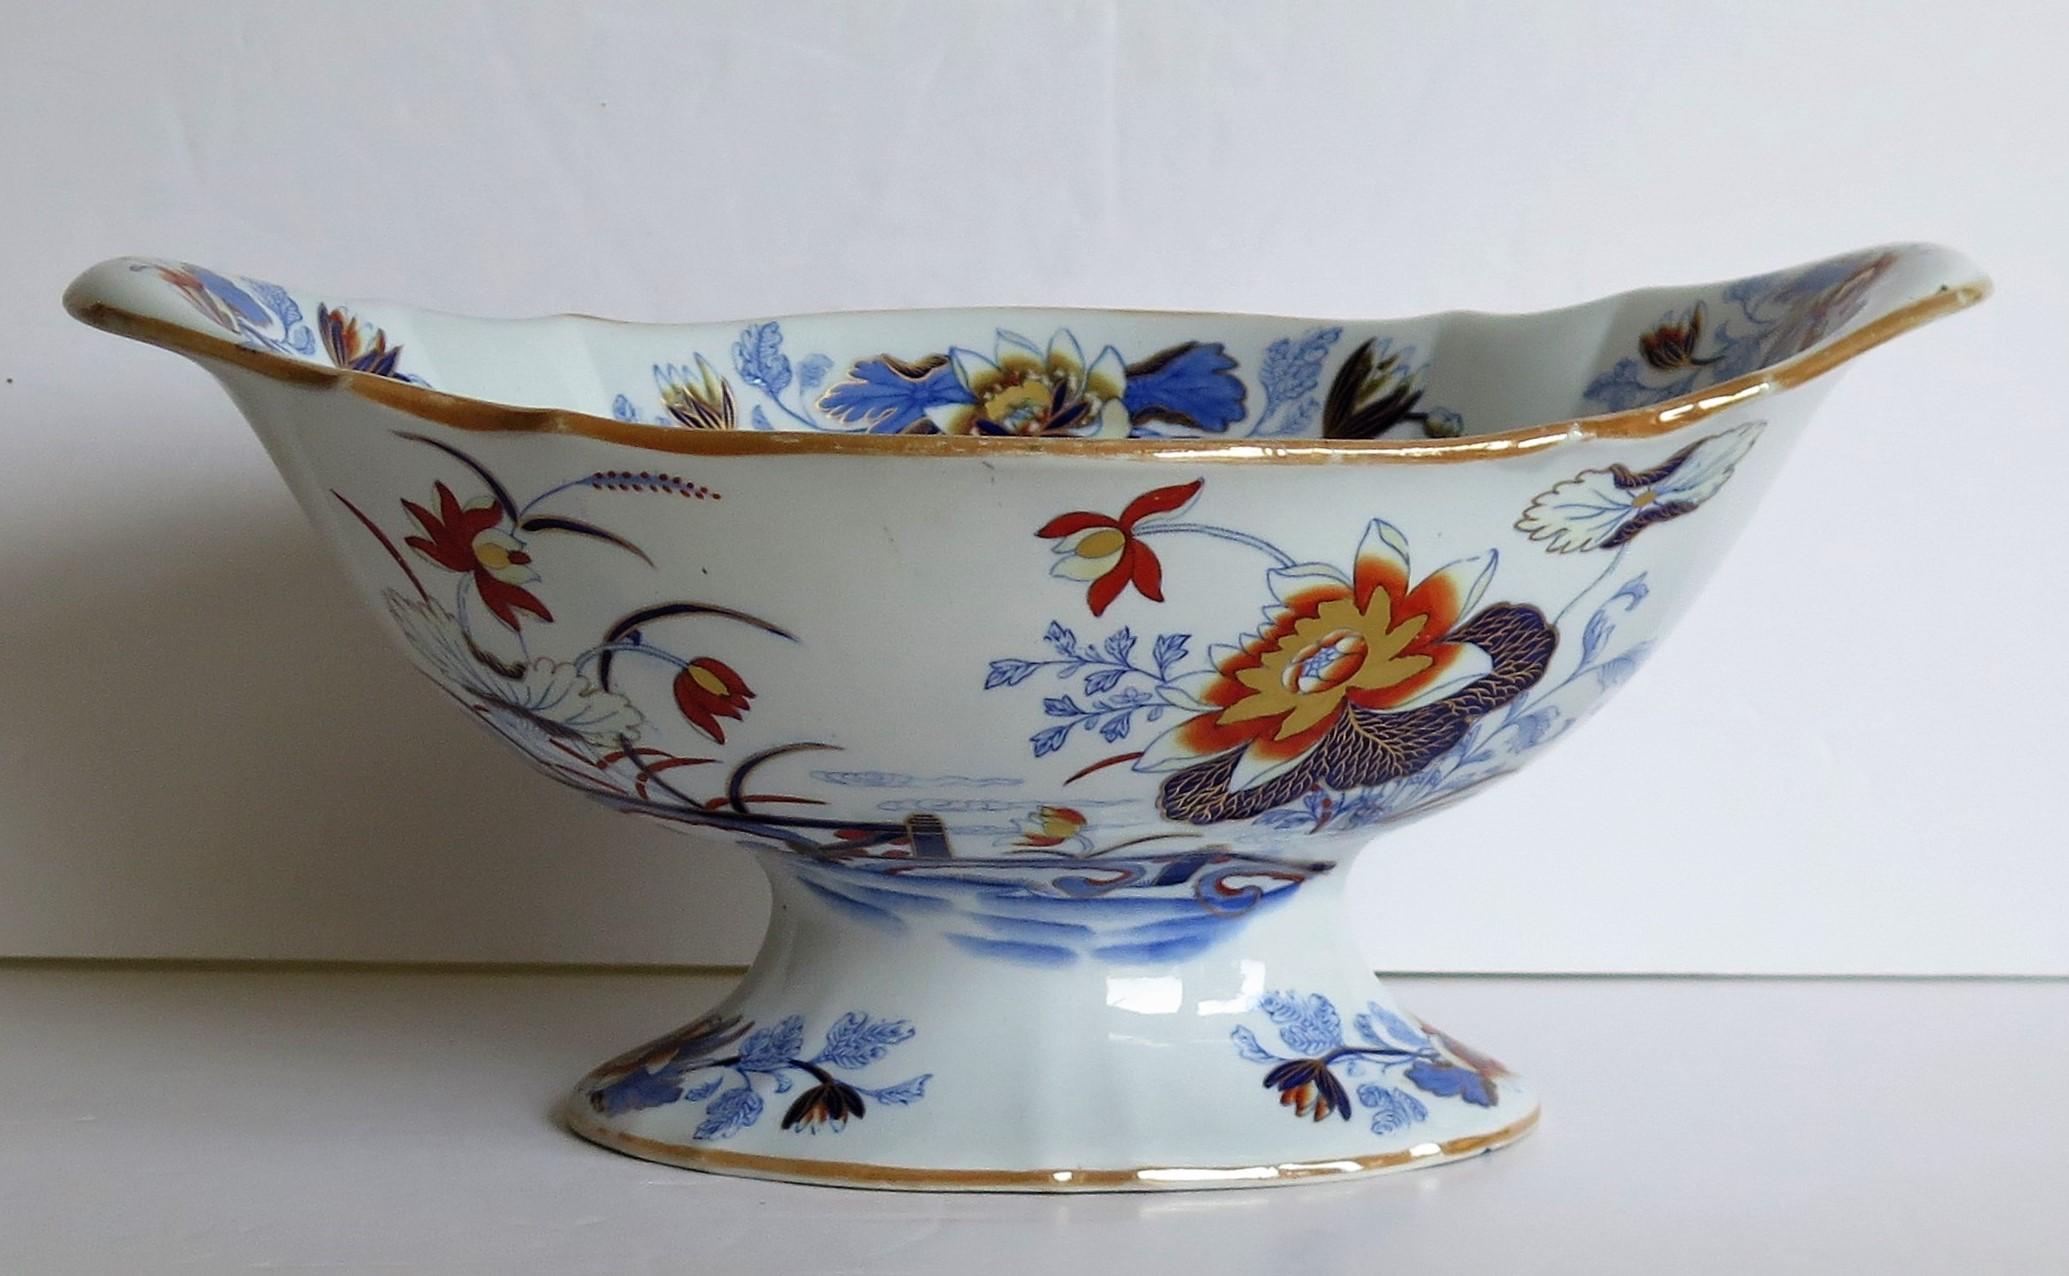 Large Wedgwood Pedestal Bowl Centrepiece Stone China Ptn 1156, circa 1840 In Good Condition For Sale In Lincoln, Lincolnshire